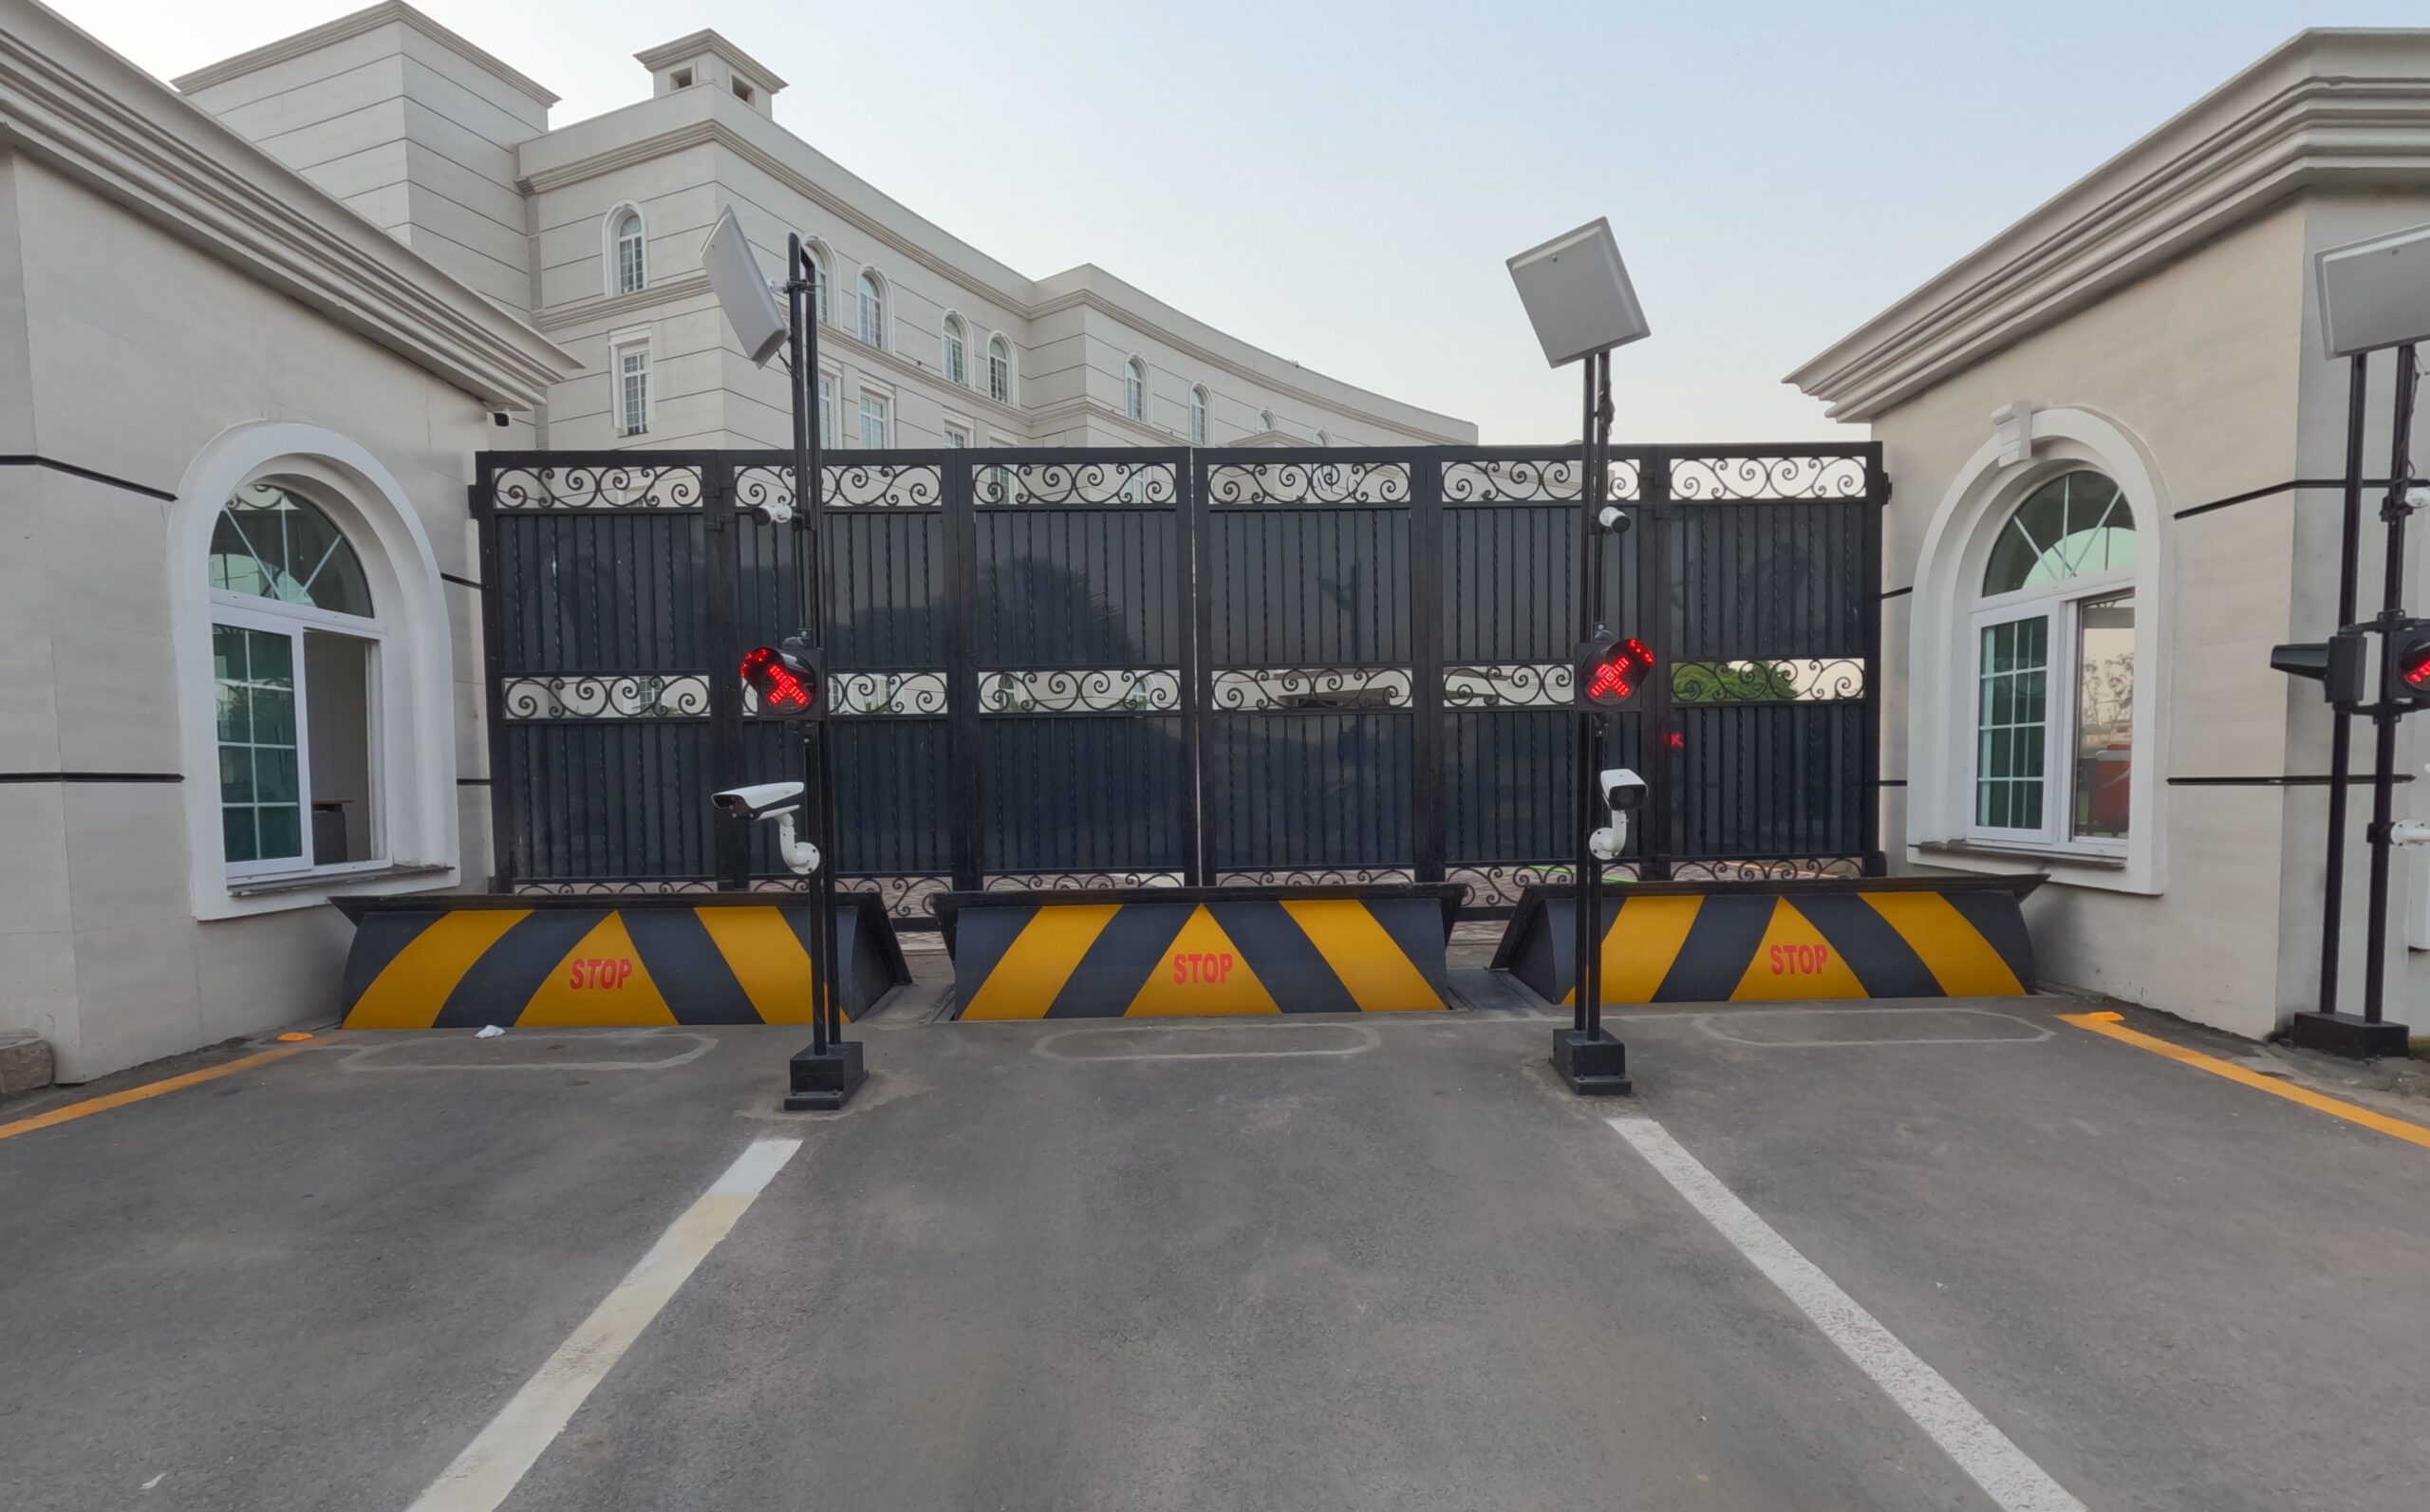 road blockers and access control system installed at entrance for security